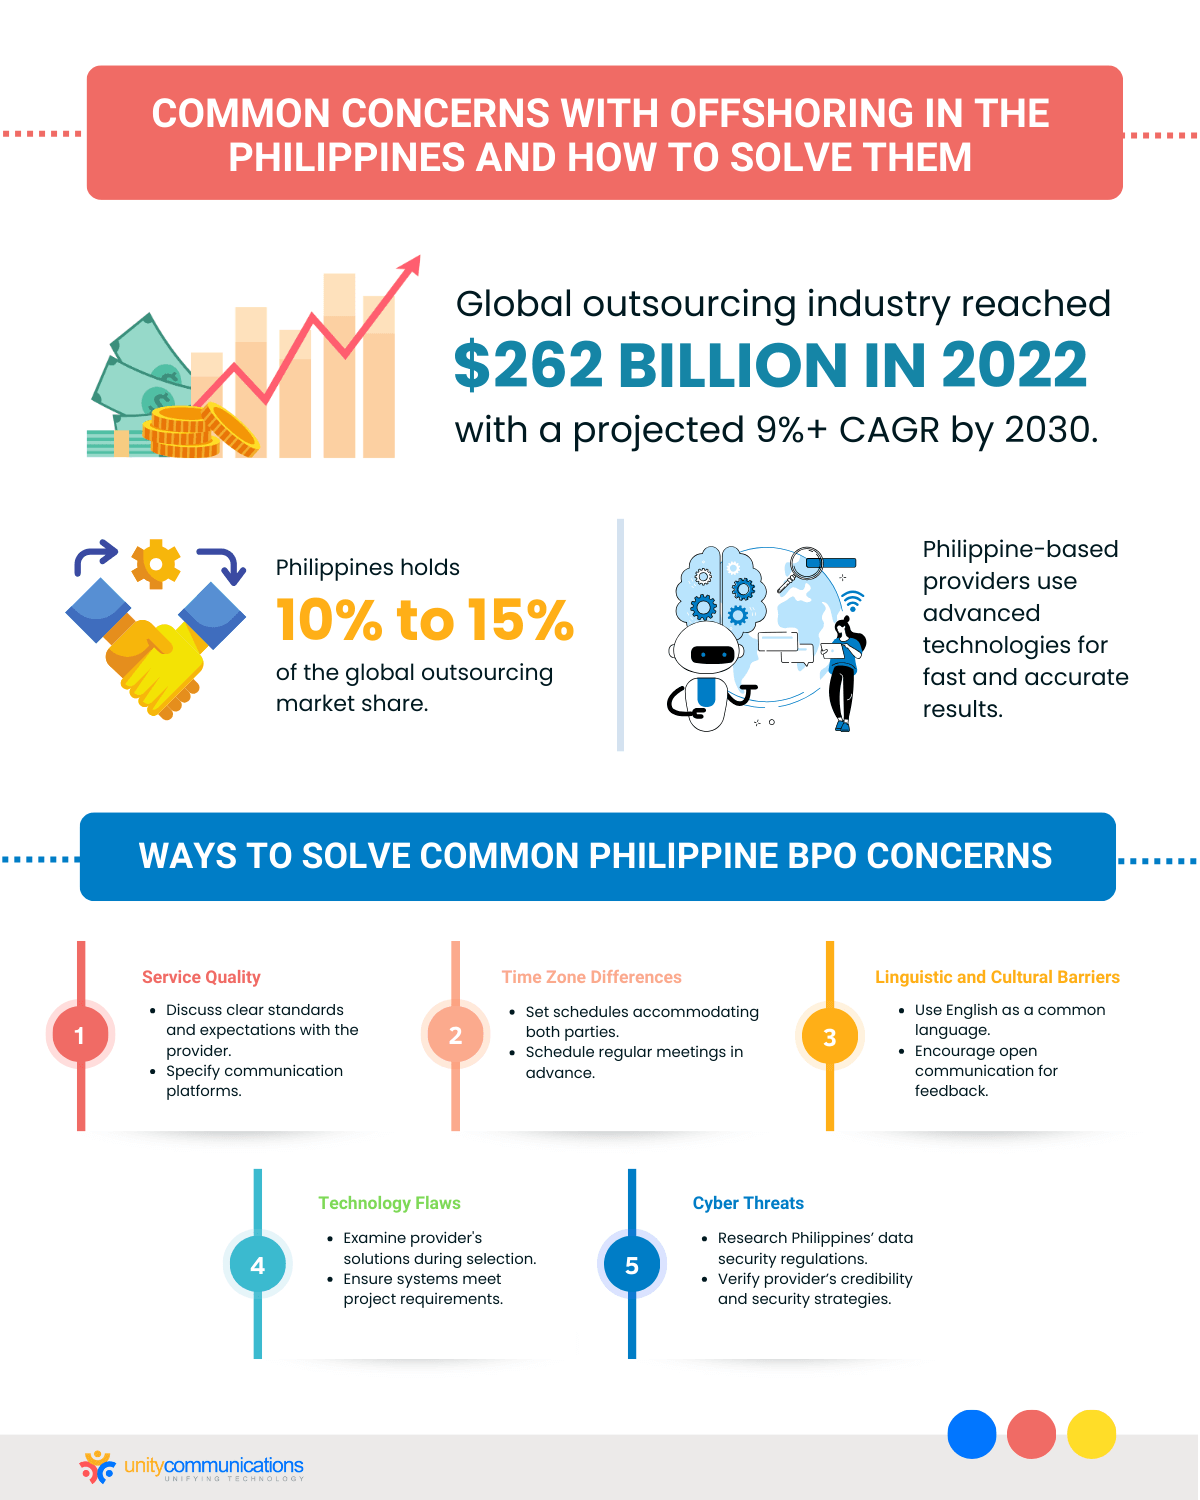 Summary - Common Concerns With Offshoring in the Philippines and How To Solve Them